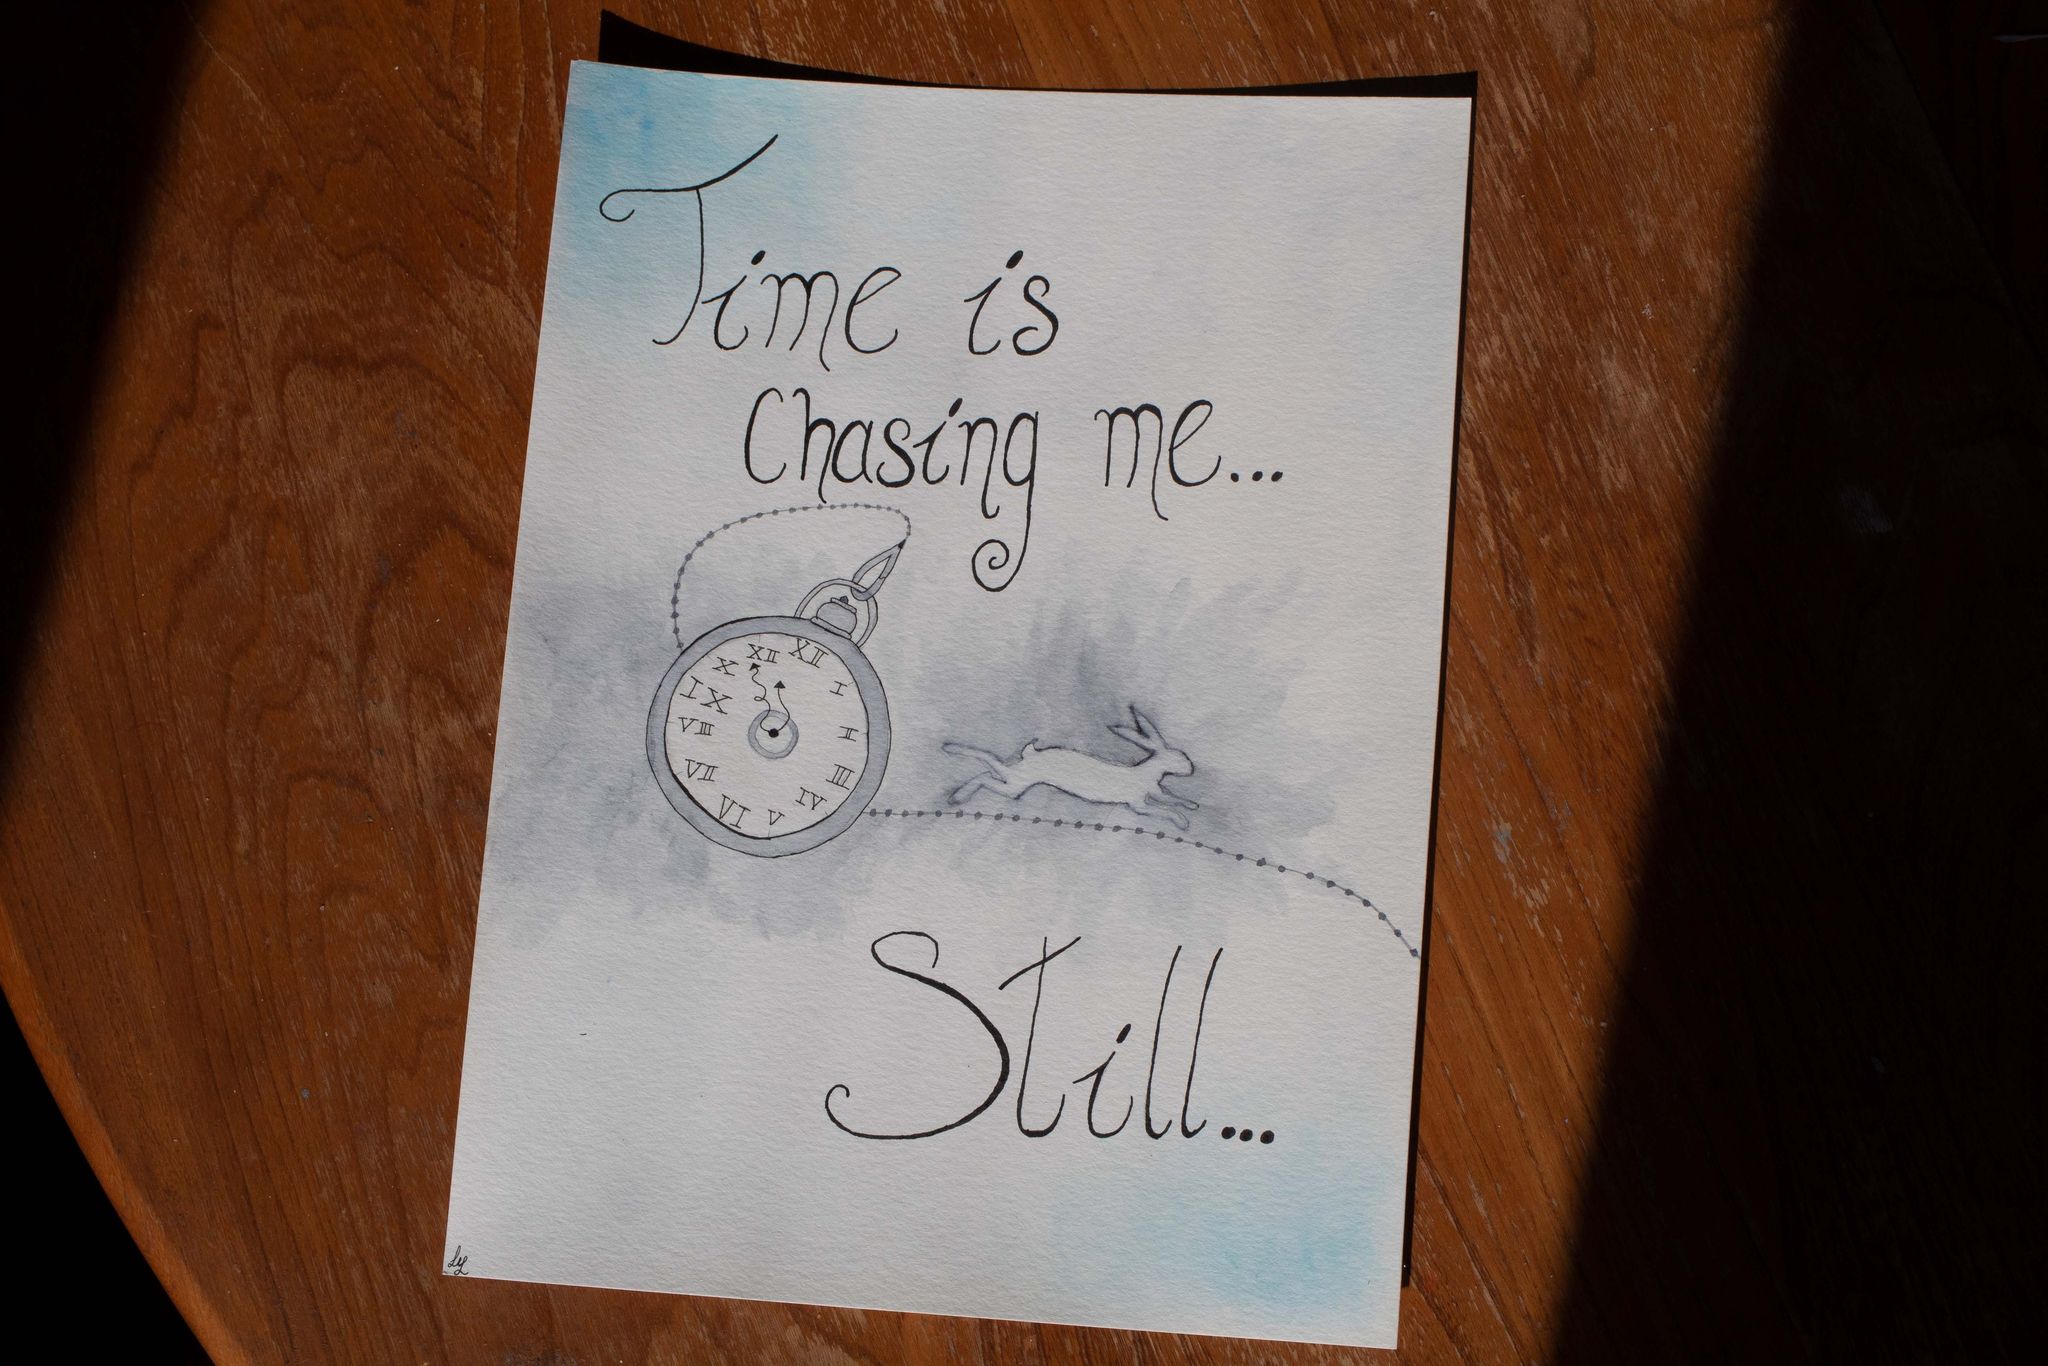 Product image of blue and white watercolour painting with white rabbit, pocket watch and text "Time is chasing me... Still", viewed from an angle